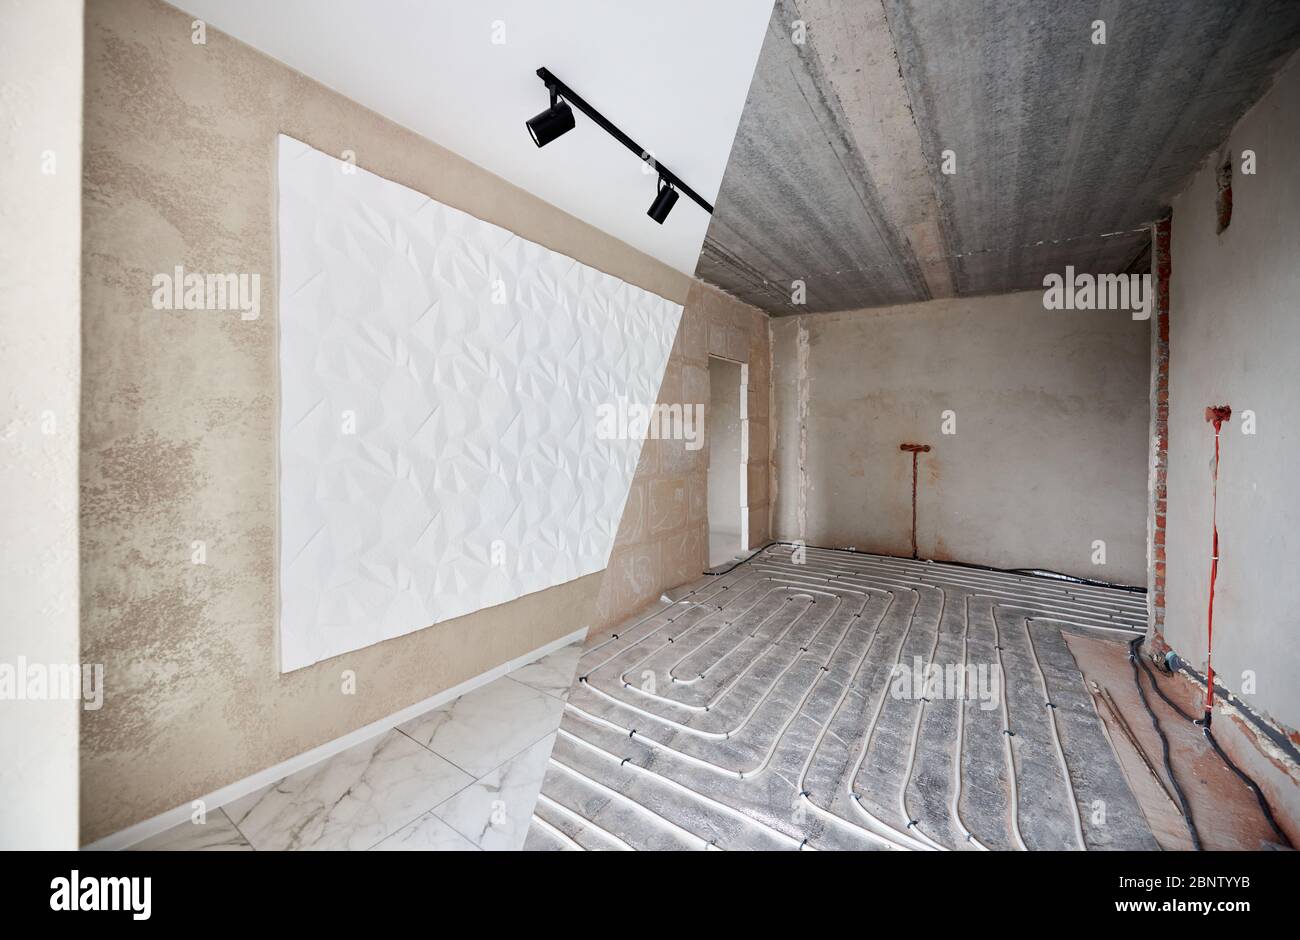 Big spacious room in apartment before and after repairs. Empty walls, 3D panel texture, modern plastering, spotlight chandelier, floor heating pipe system, white shiny tiles on floor Stock Photo